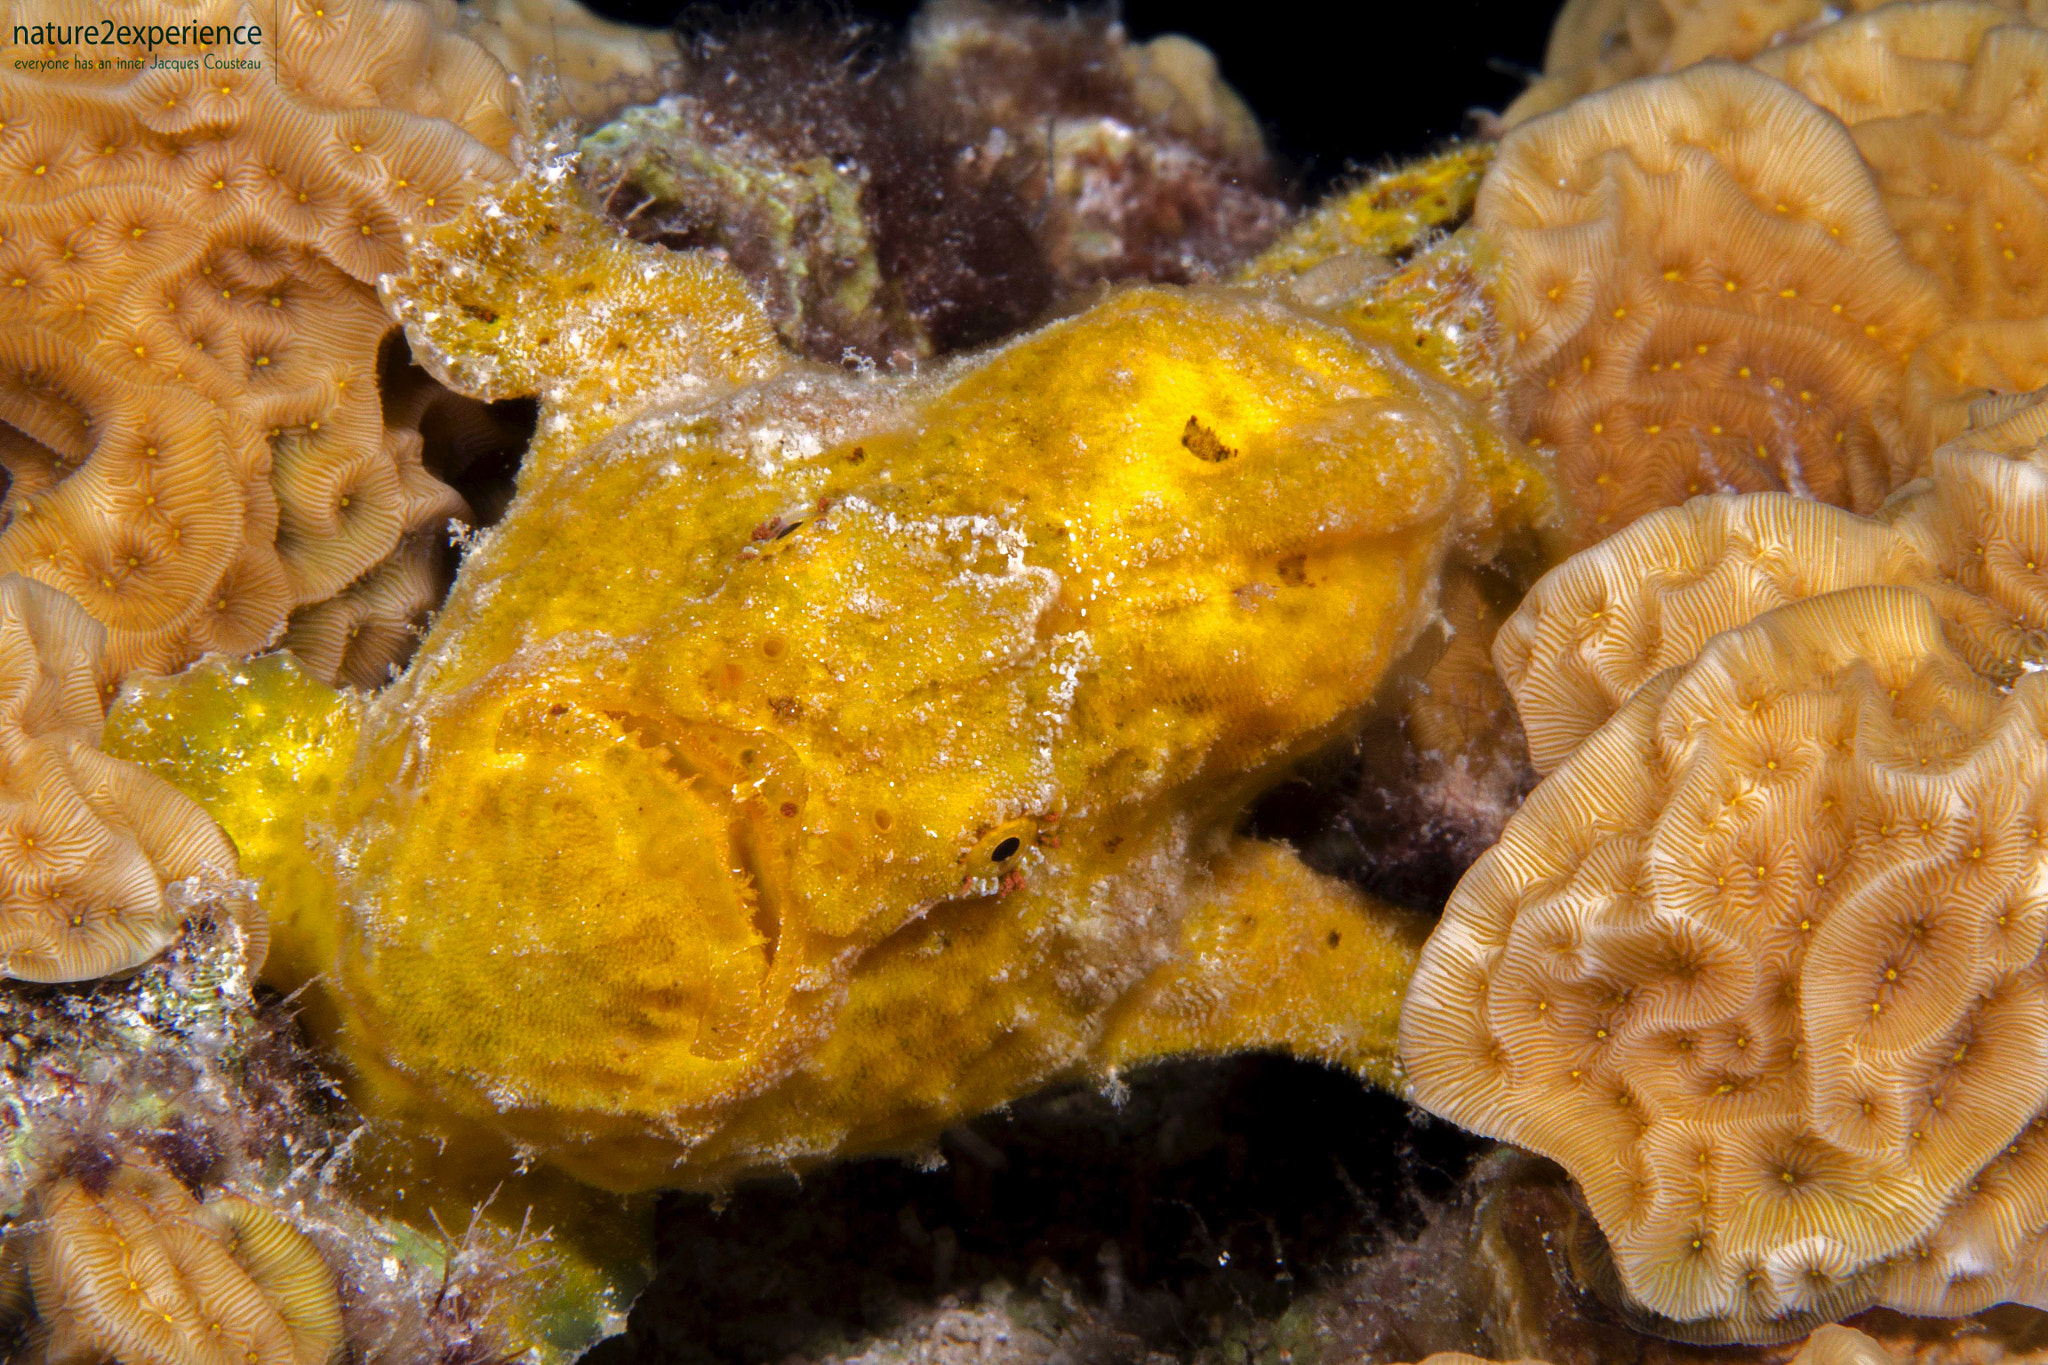 Olympus PEN E-PL5 sample photo. Frogfish photography